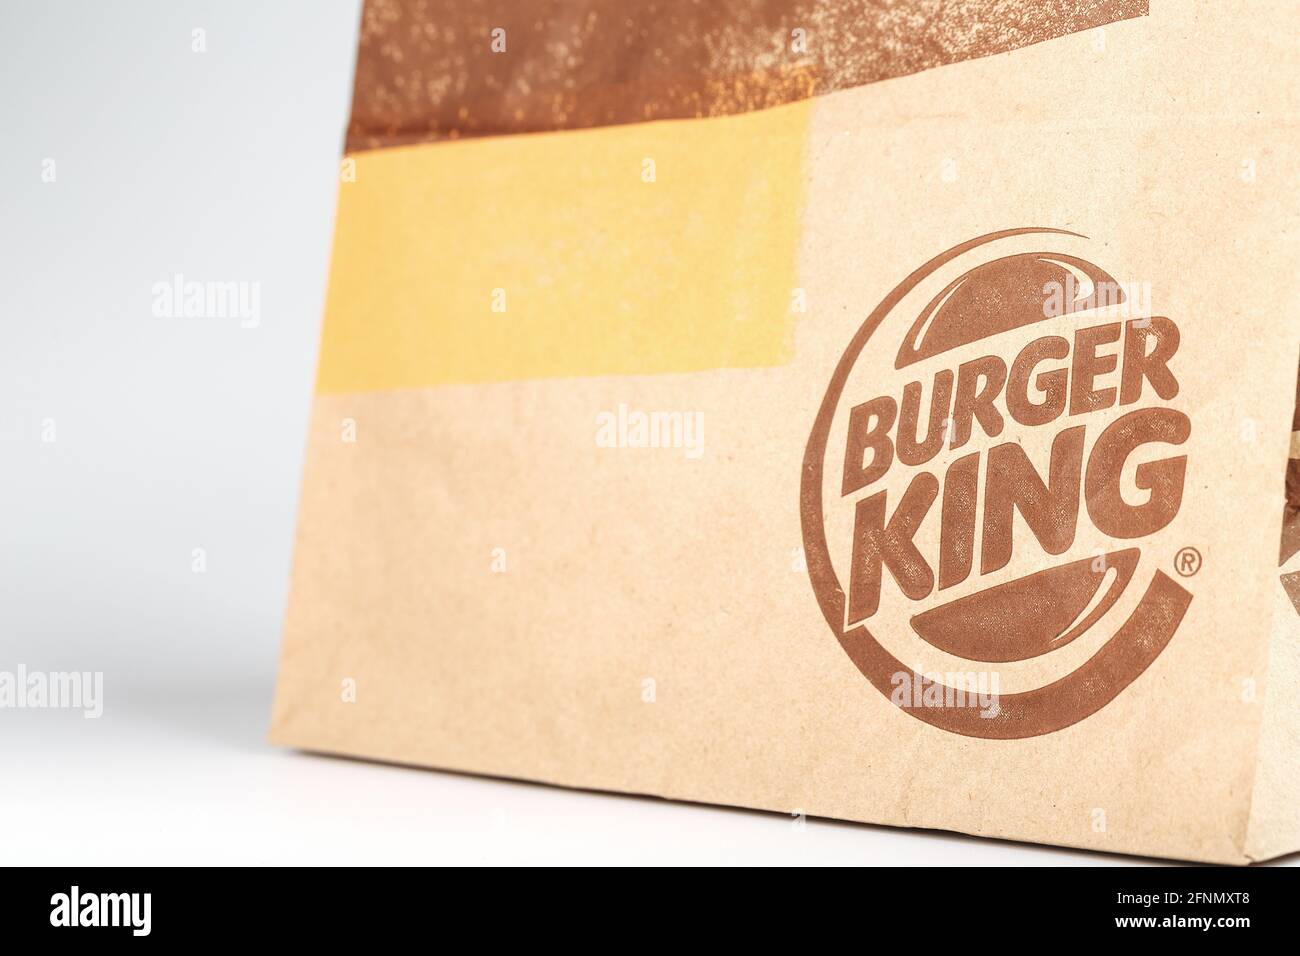 Russia, Moscow - May 17, 2021: Paper packaging with an order from Burger King on a white background. Burger King is a global fast food hamburger chain Stock Photo